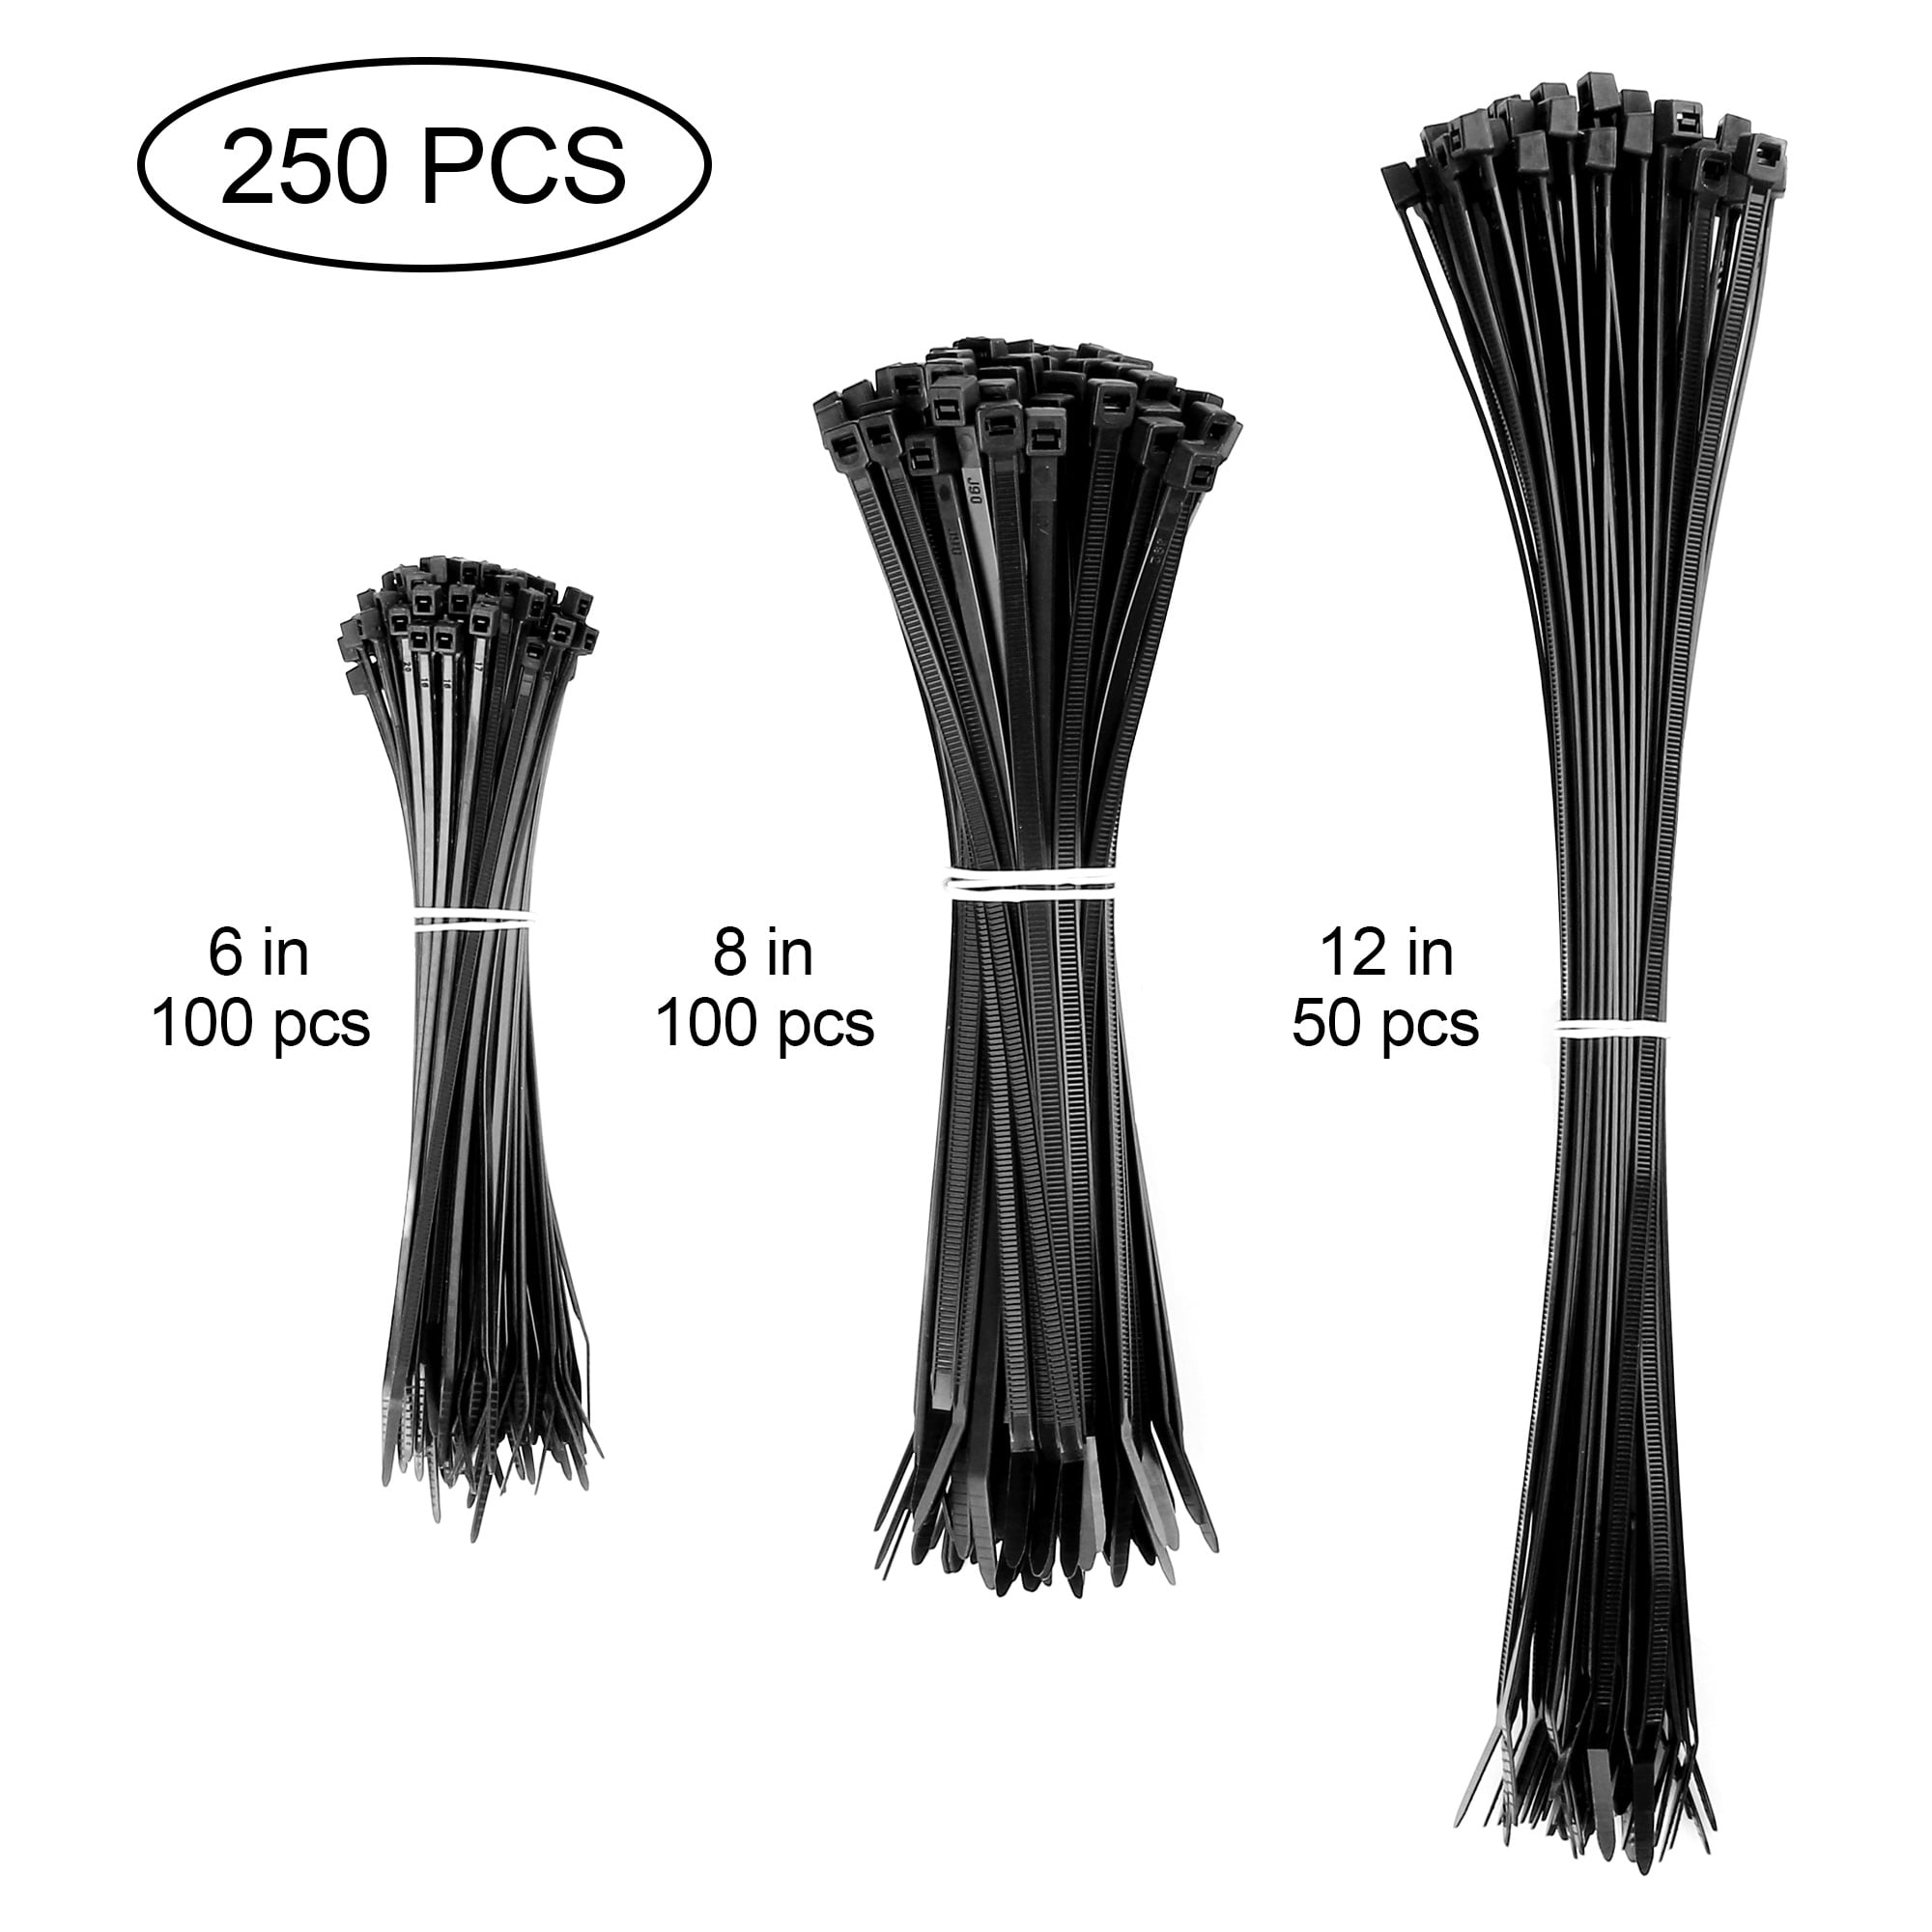 250 pcs Black ZIP Ties Variety Pack CABLE TIES Assorted Sizes Black Wire Cord Or 